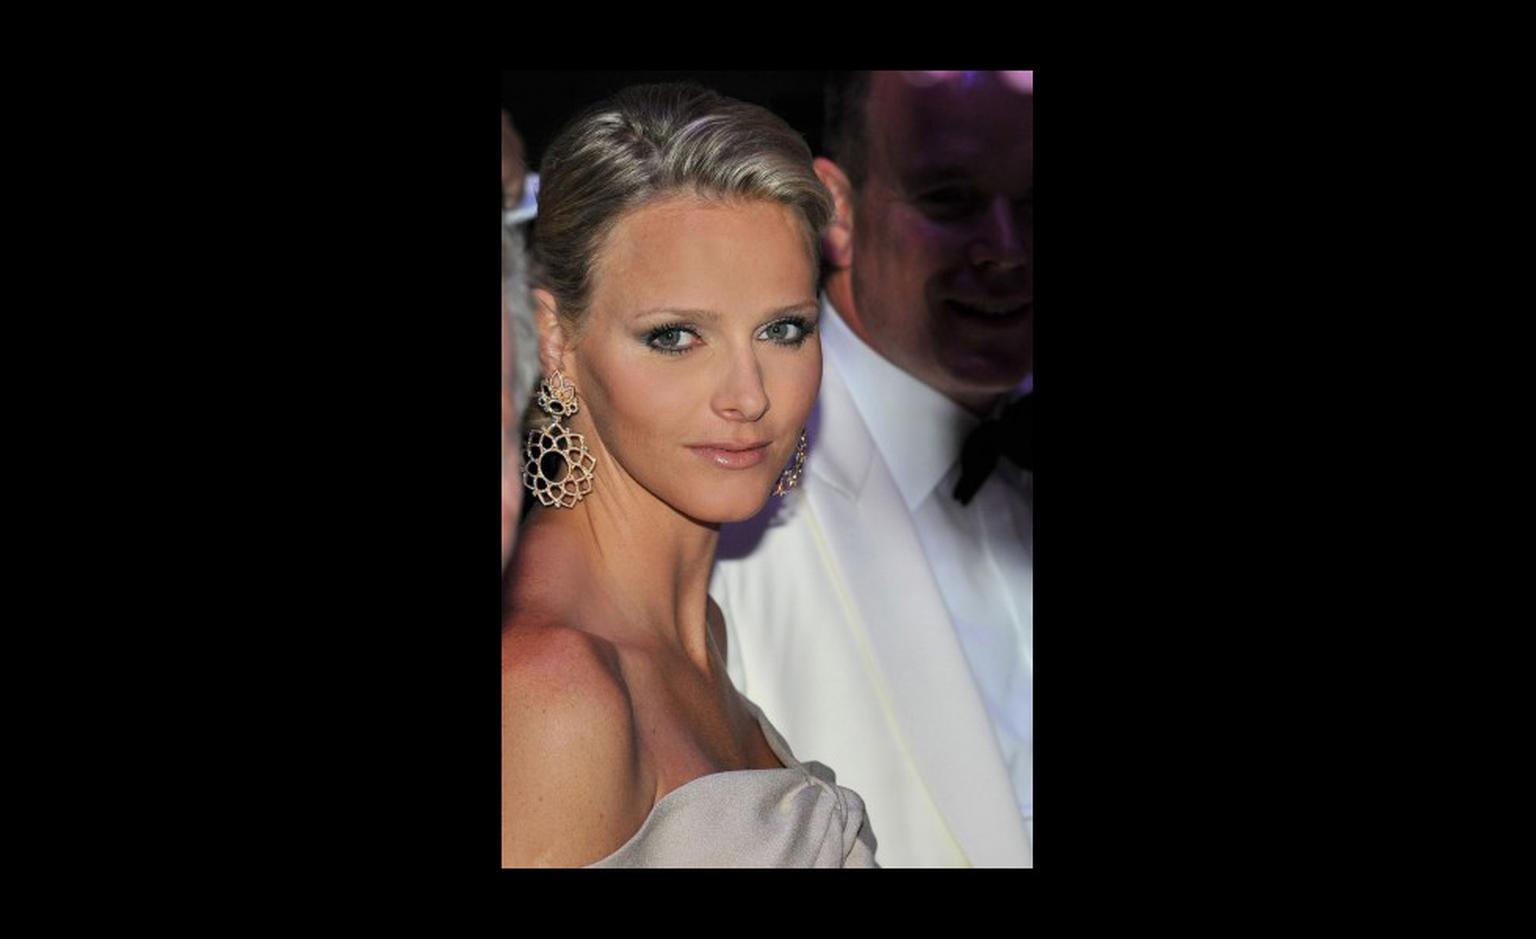 Big earring statement from Charlene Wittstock. I like the way she wears just the earrings and avoids the Christmas tree look. Photo: Prince's Palace of Monaco